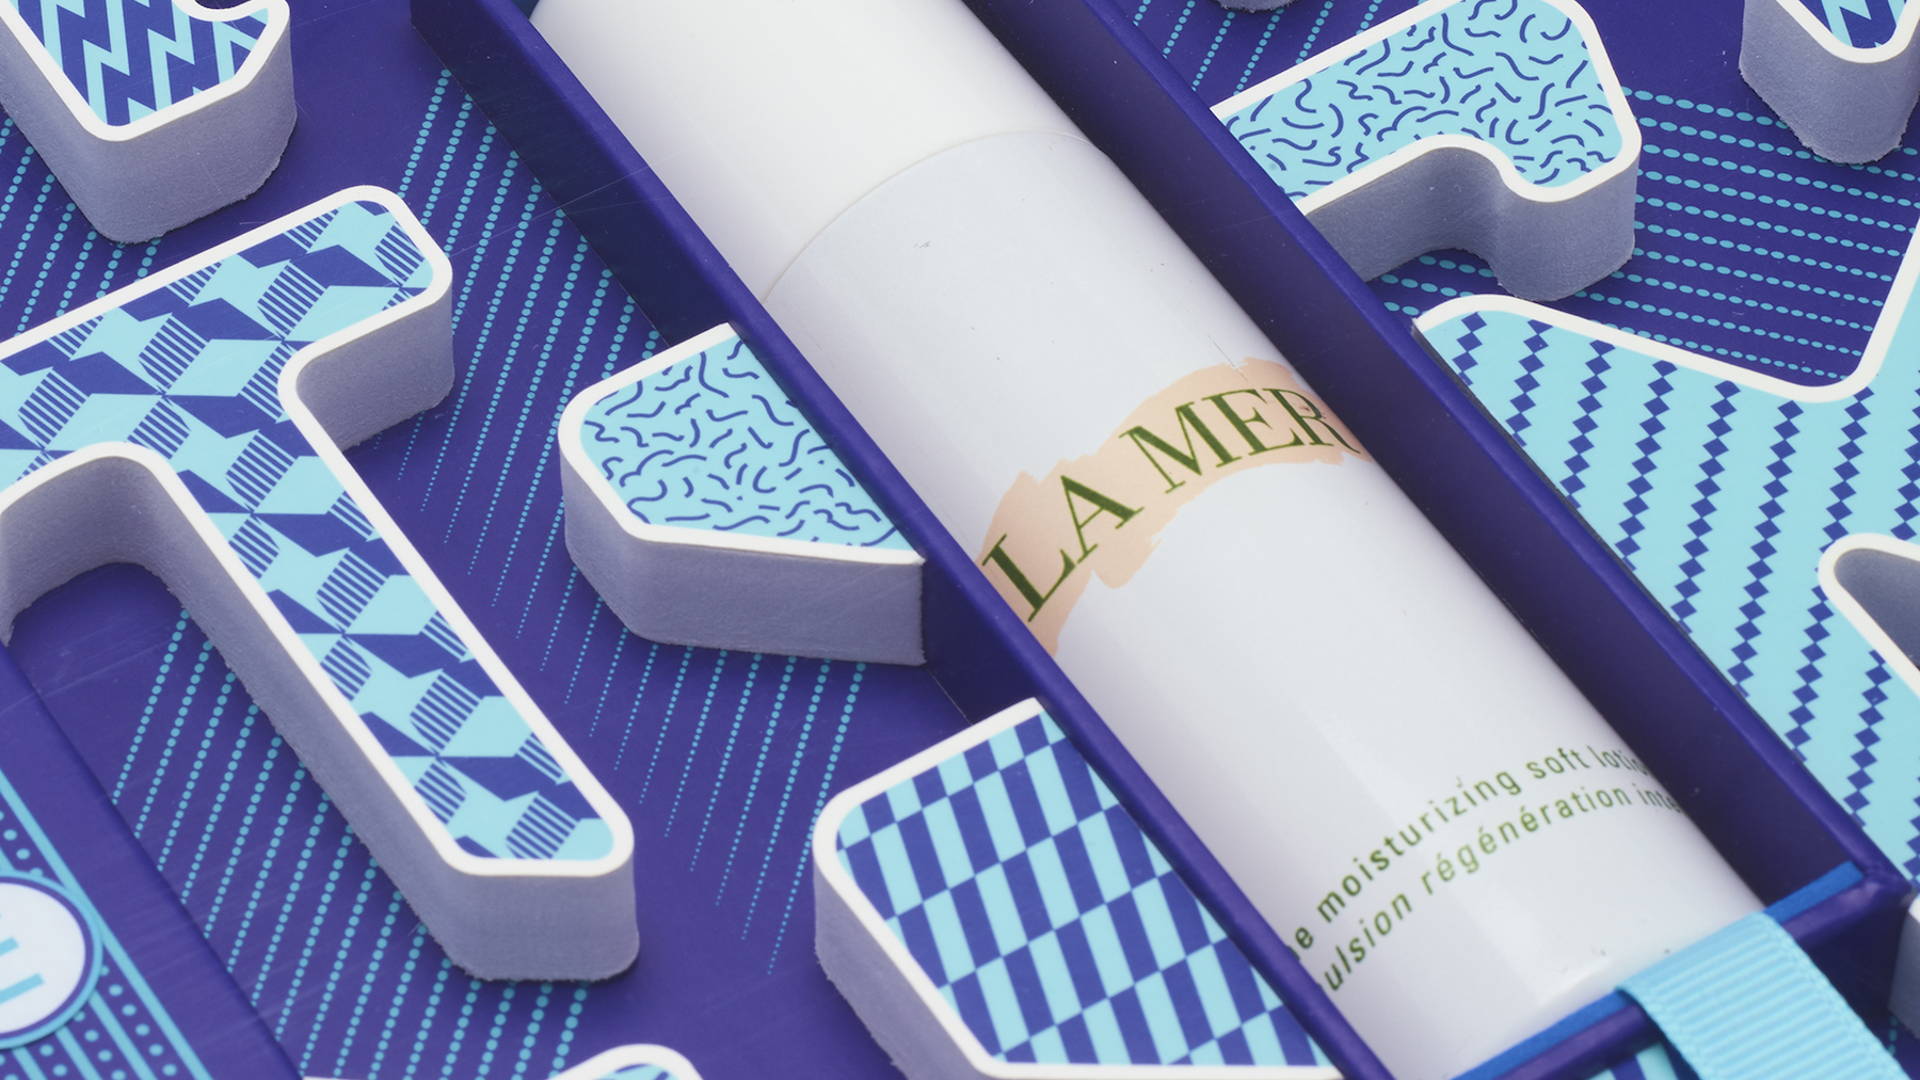 Featured image for This Lotion Comes in a Box Inspired by Pinball Machines and Chinese Puzzles